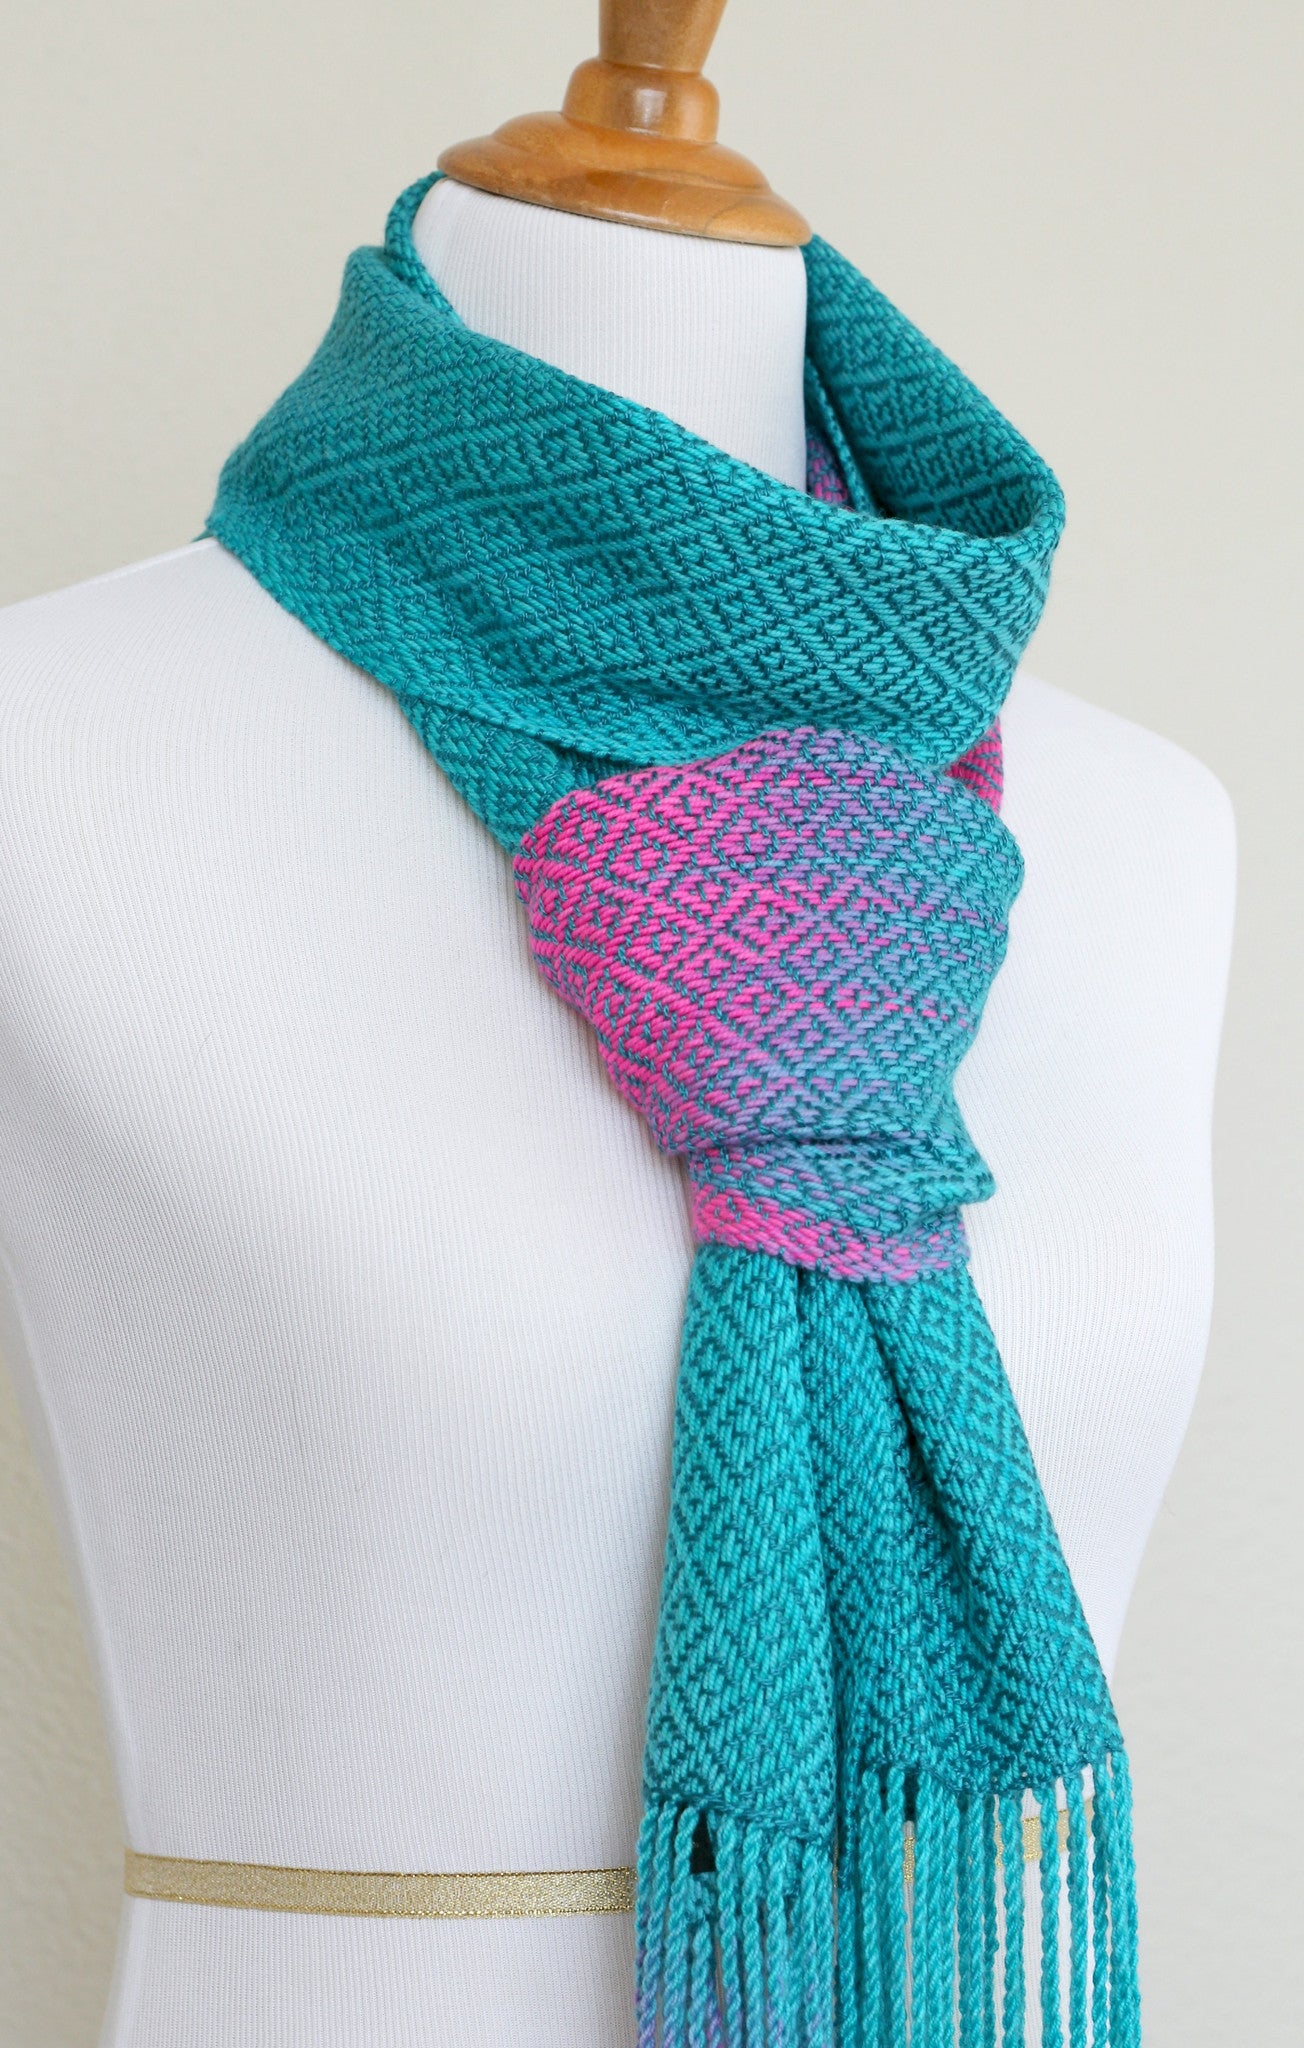 Woven scarf in blue and neon pink with woven pattern and twisted fringe